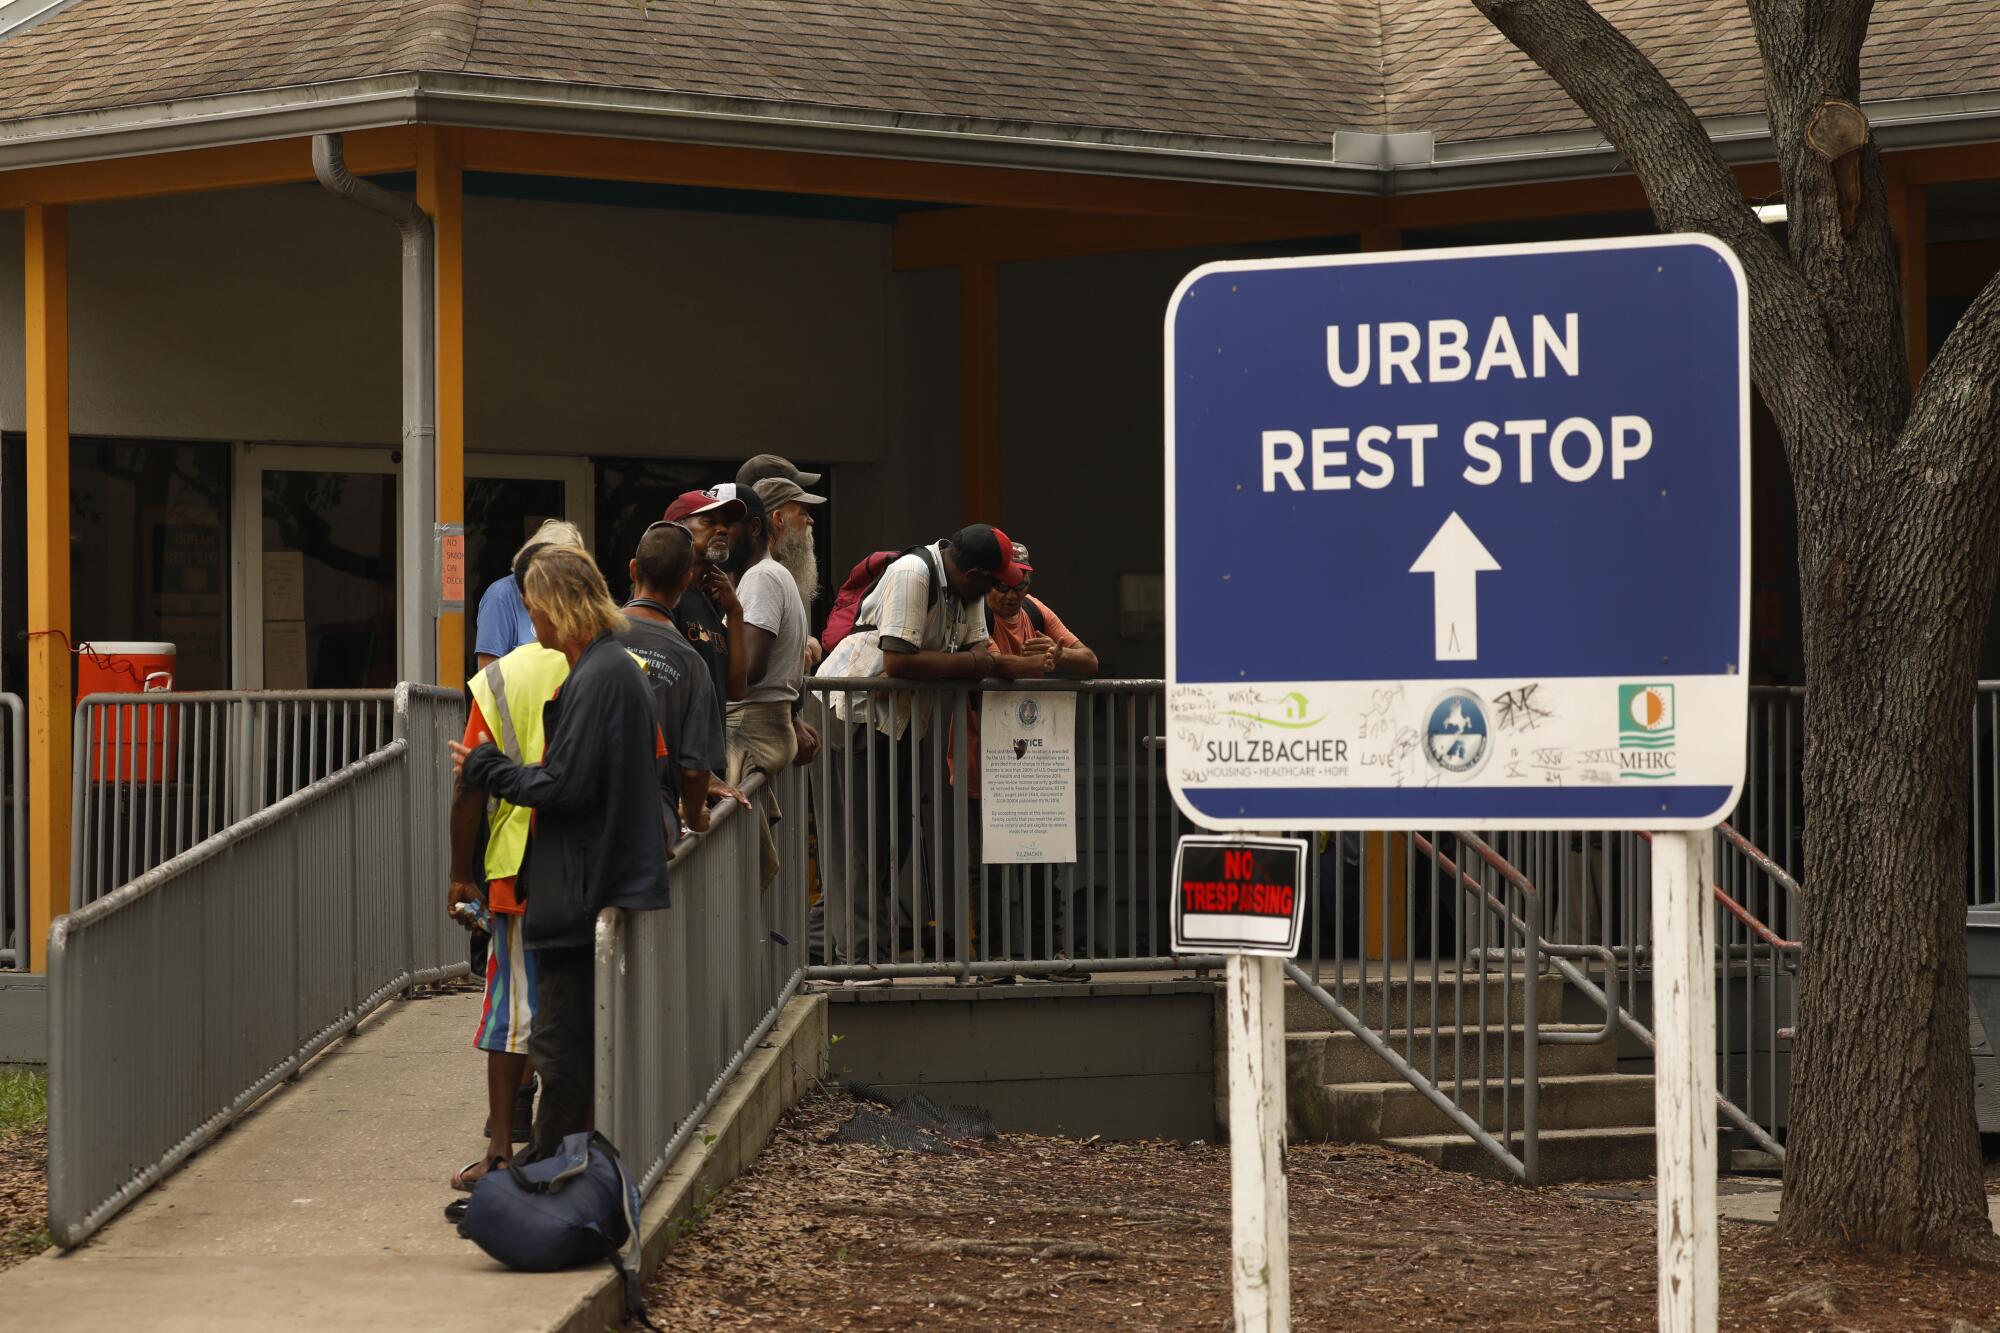 People stand near railings on a walkway to a building, near a blue-and-white sign that reads Urban Rest Stop